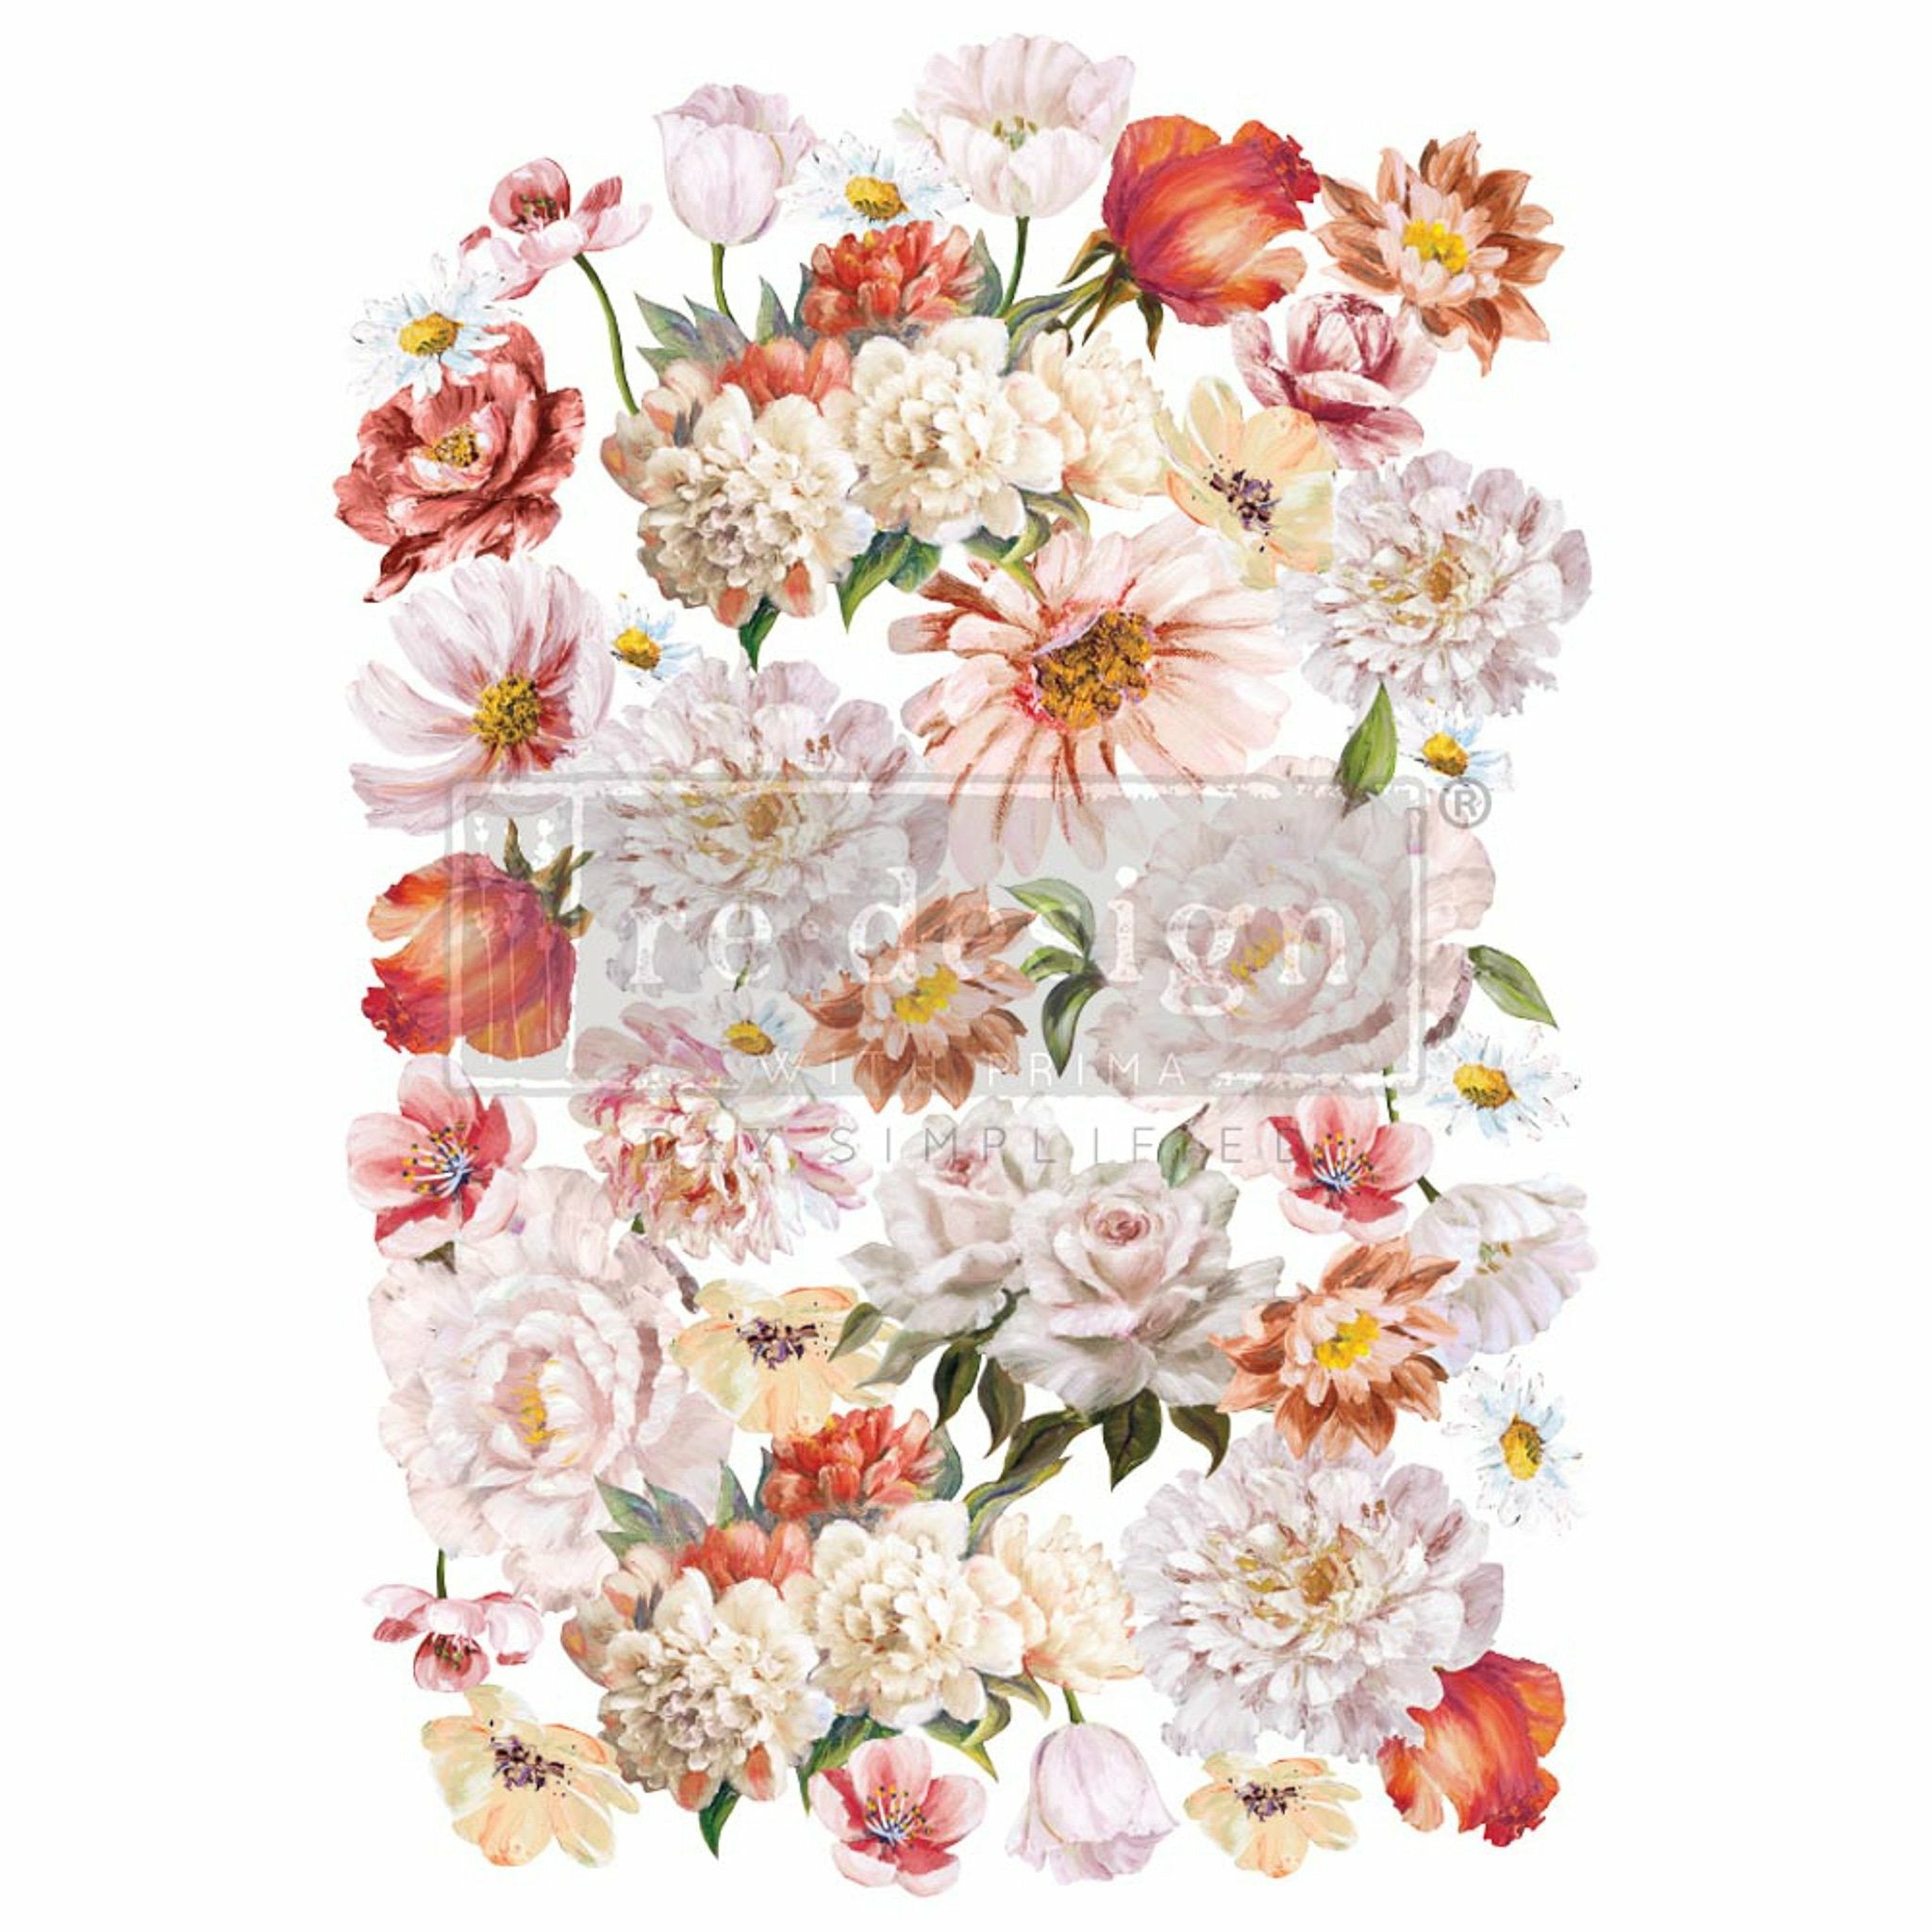 Rub-on transfer design featuring various peach colored flowers. White borders are on the sides.